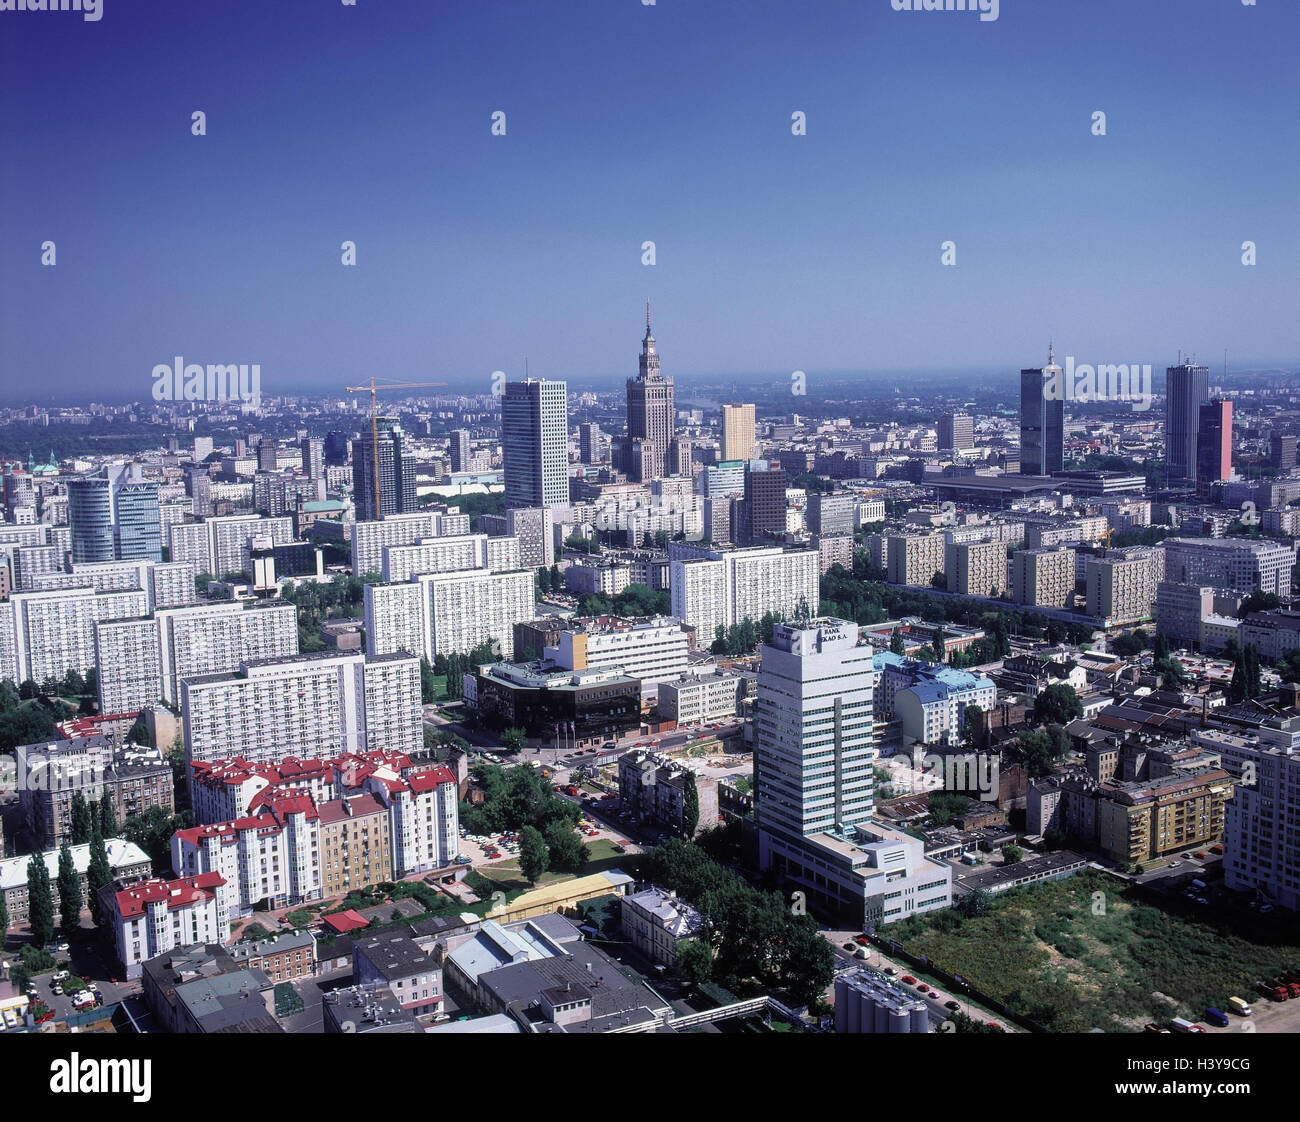 Poles, Warsaw, centre, town overview, Warszawa, capital, architectural style, modern, old, anew Stock Photo